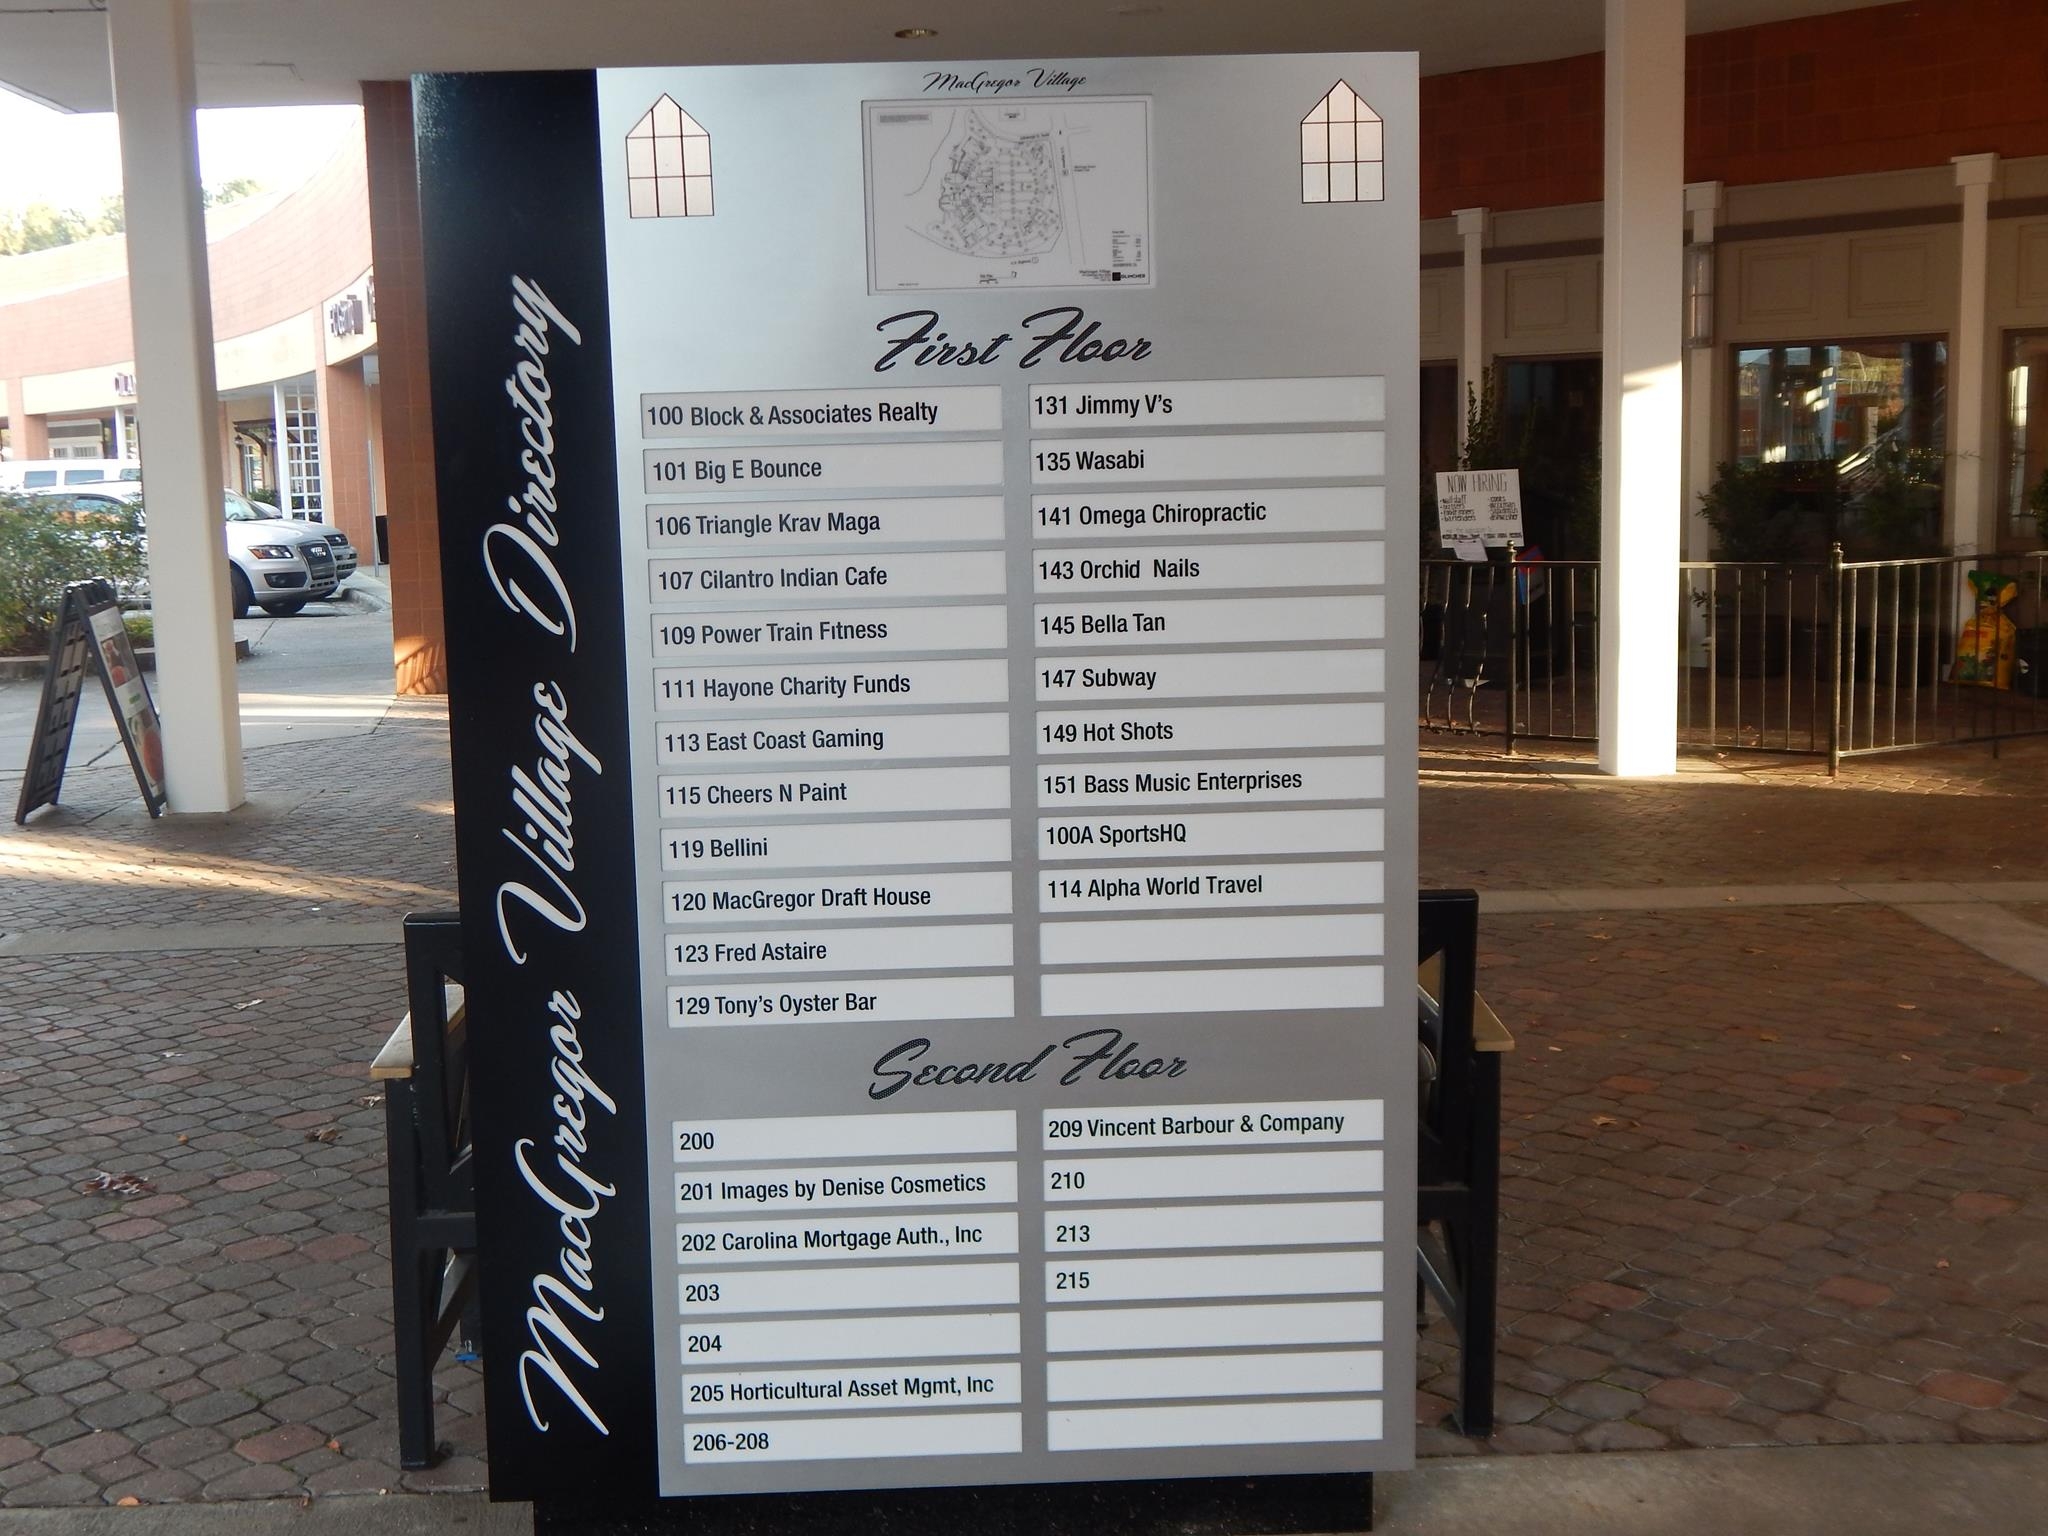 Directory Signage Outside the Building